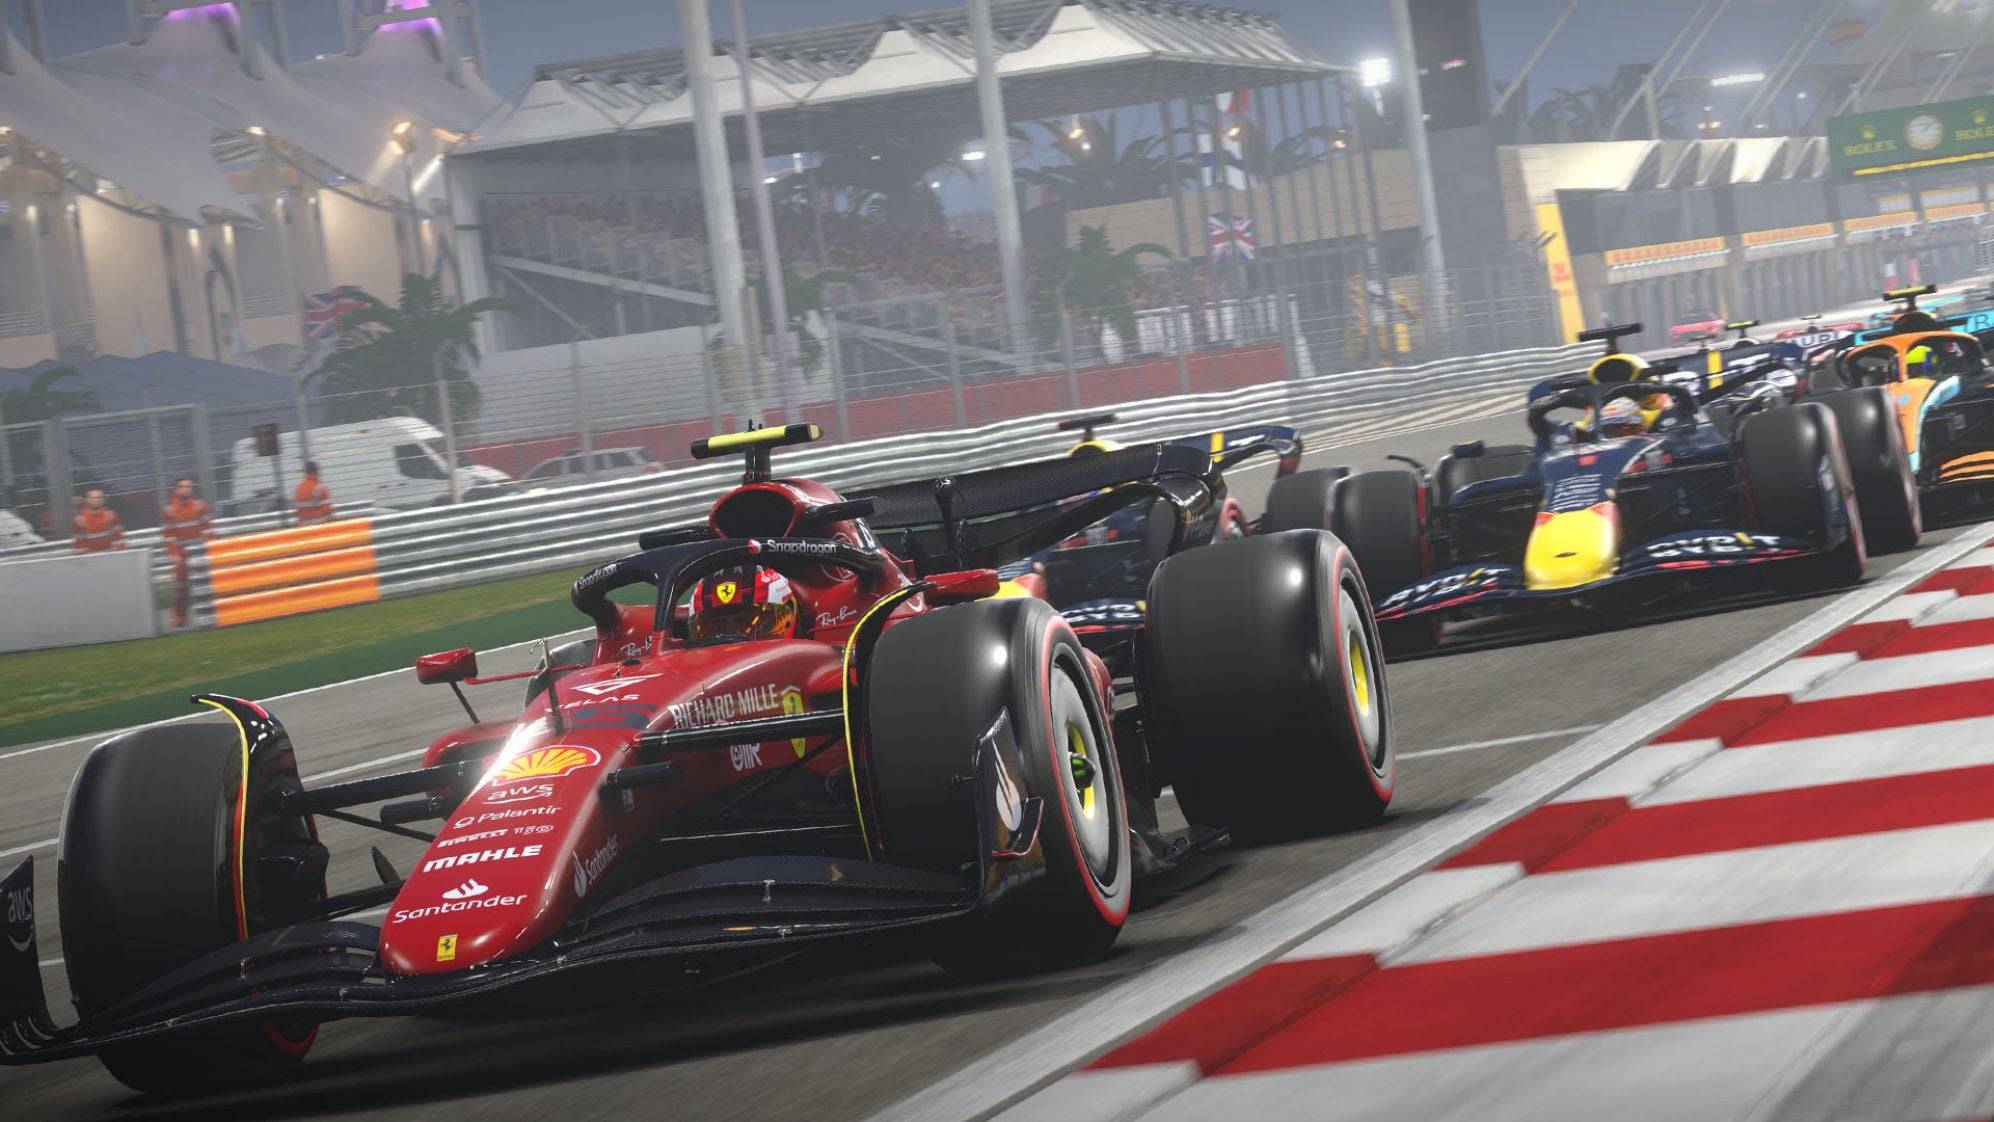 The new F1 game will feature the new era of Formula 1 cars